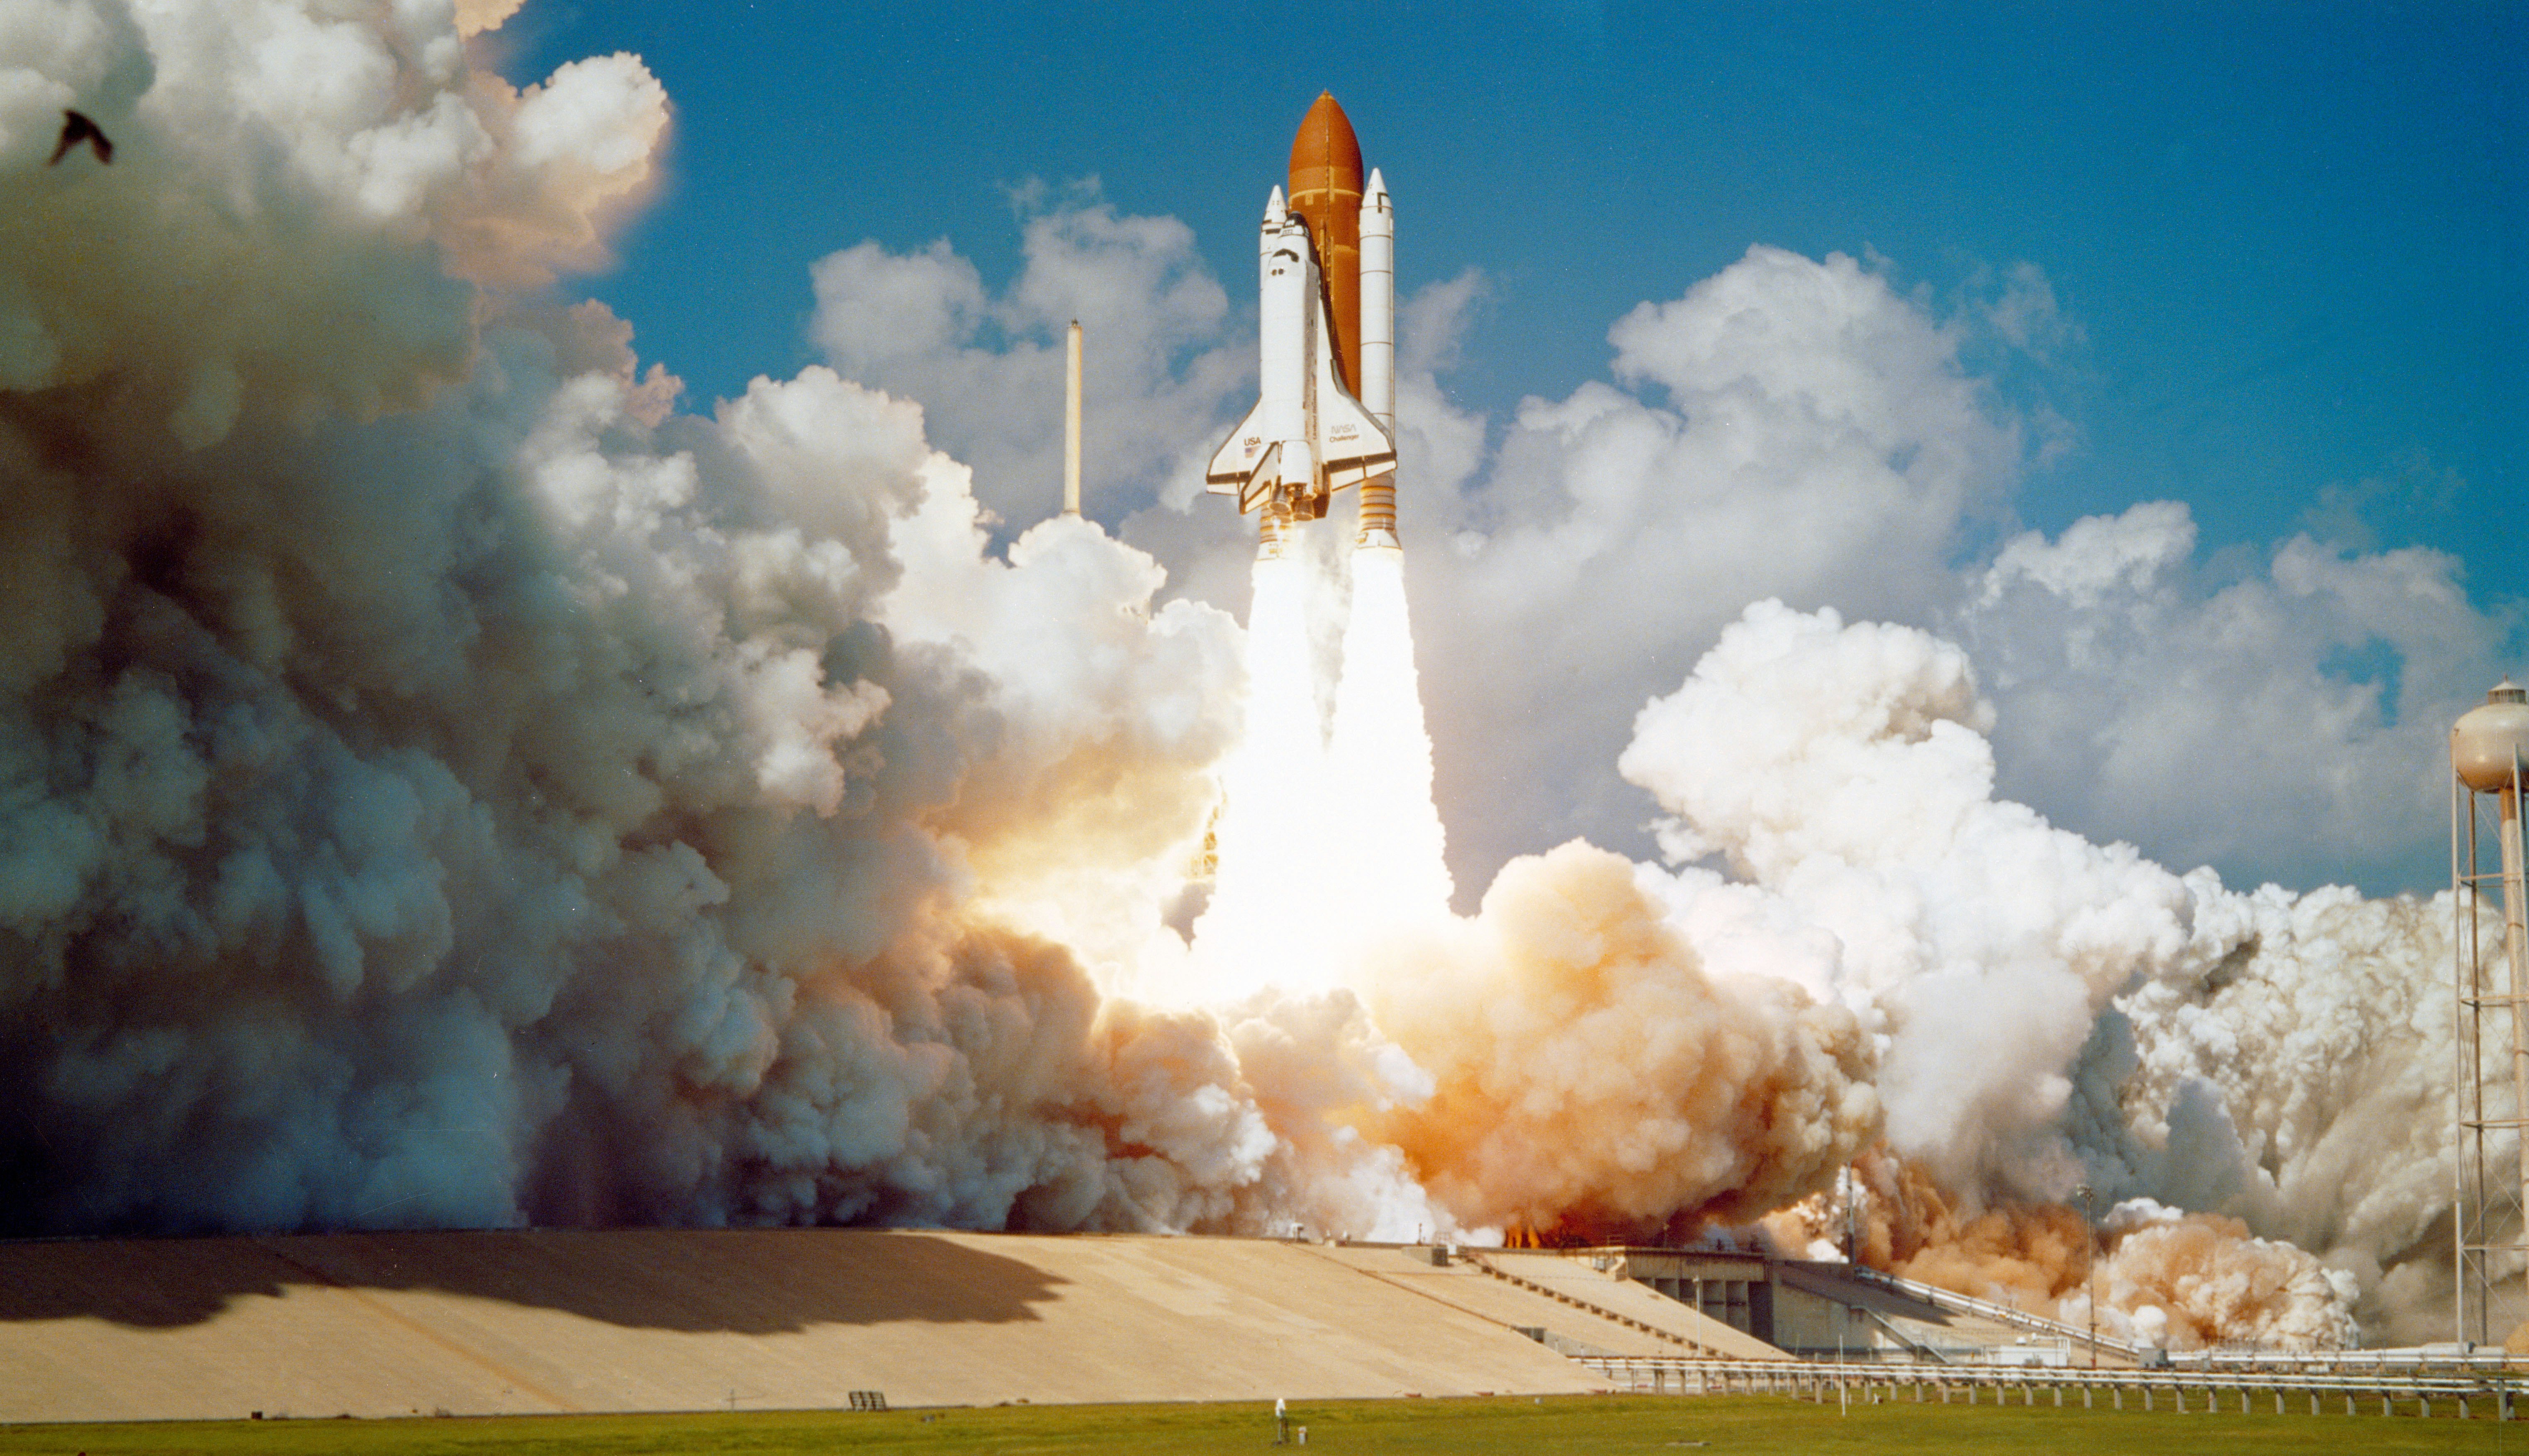 The Space Shuttle Challenger launching from Complex 39